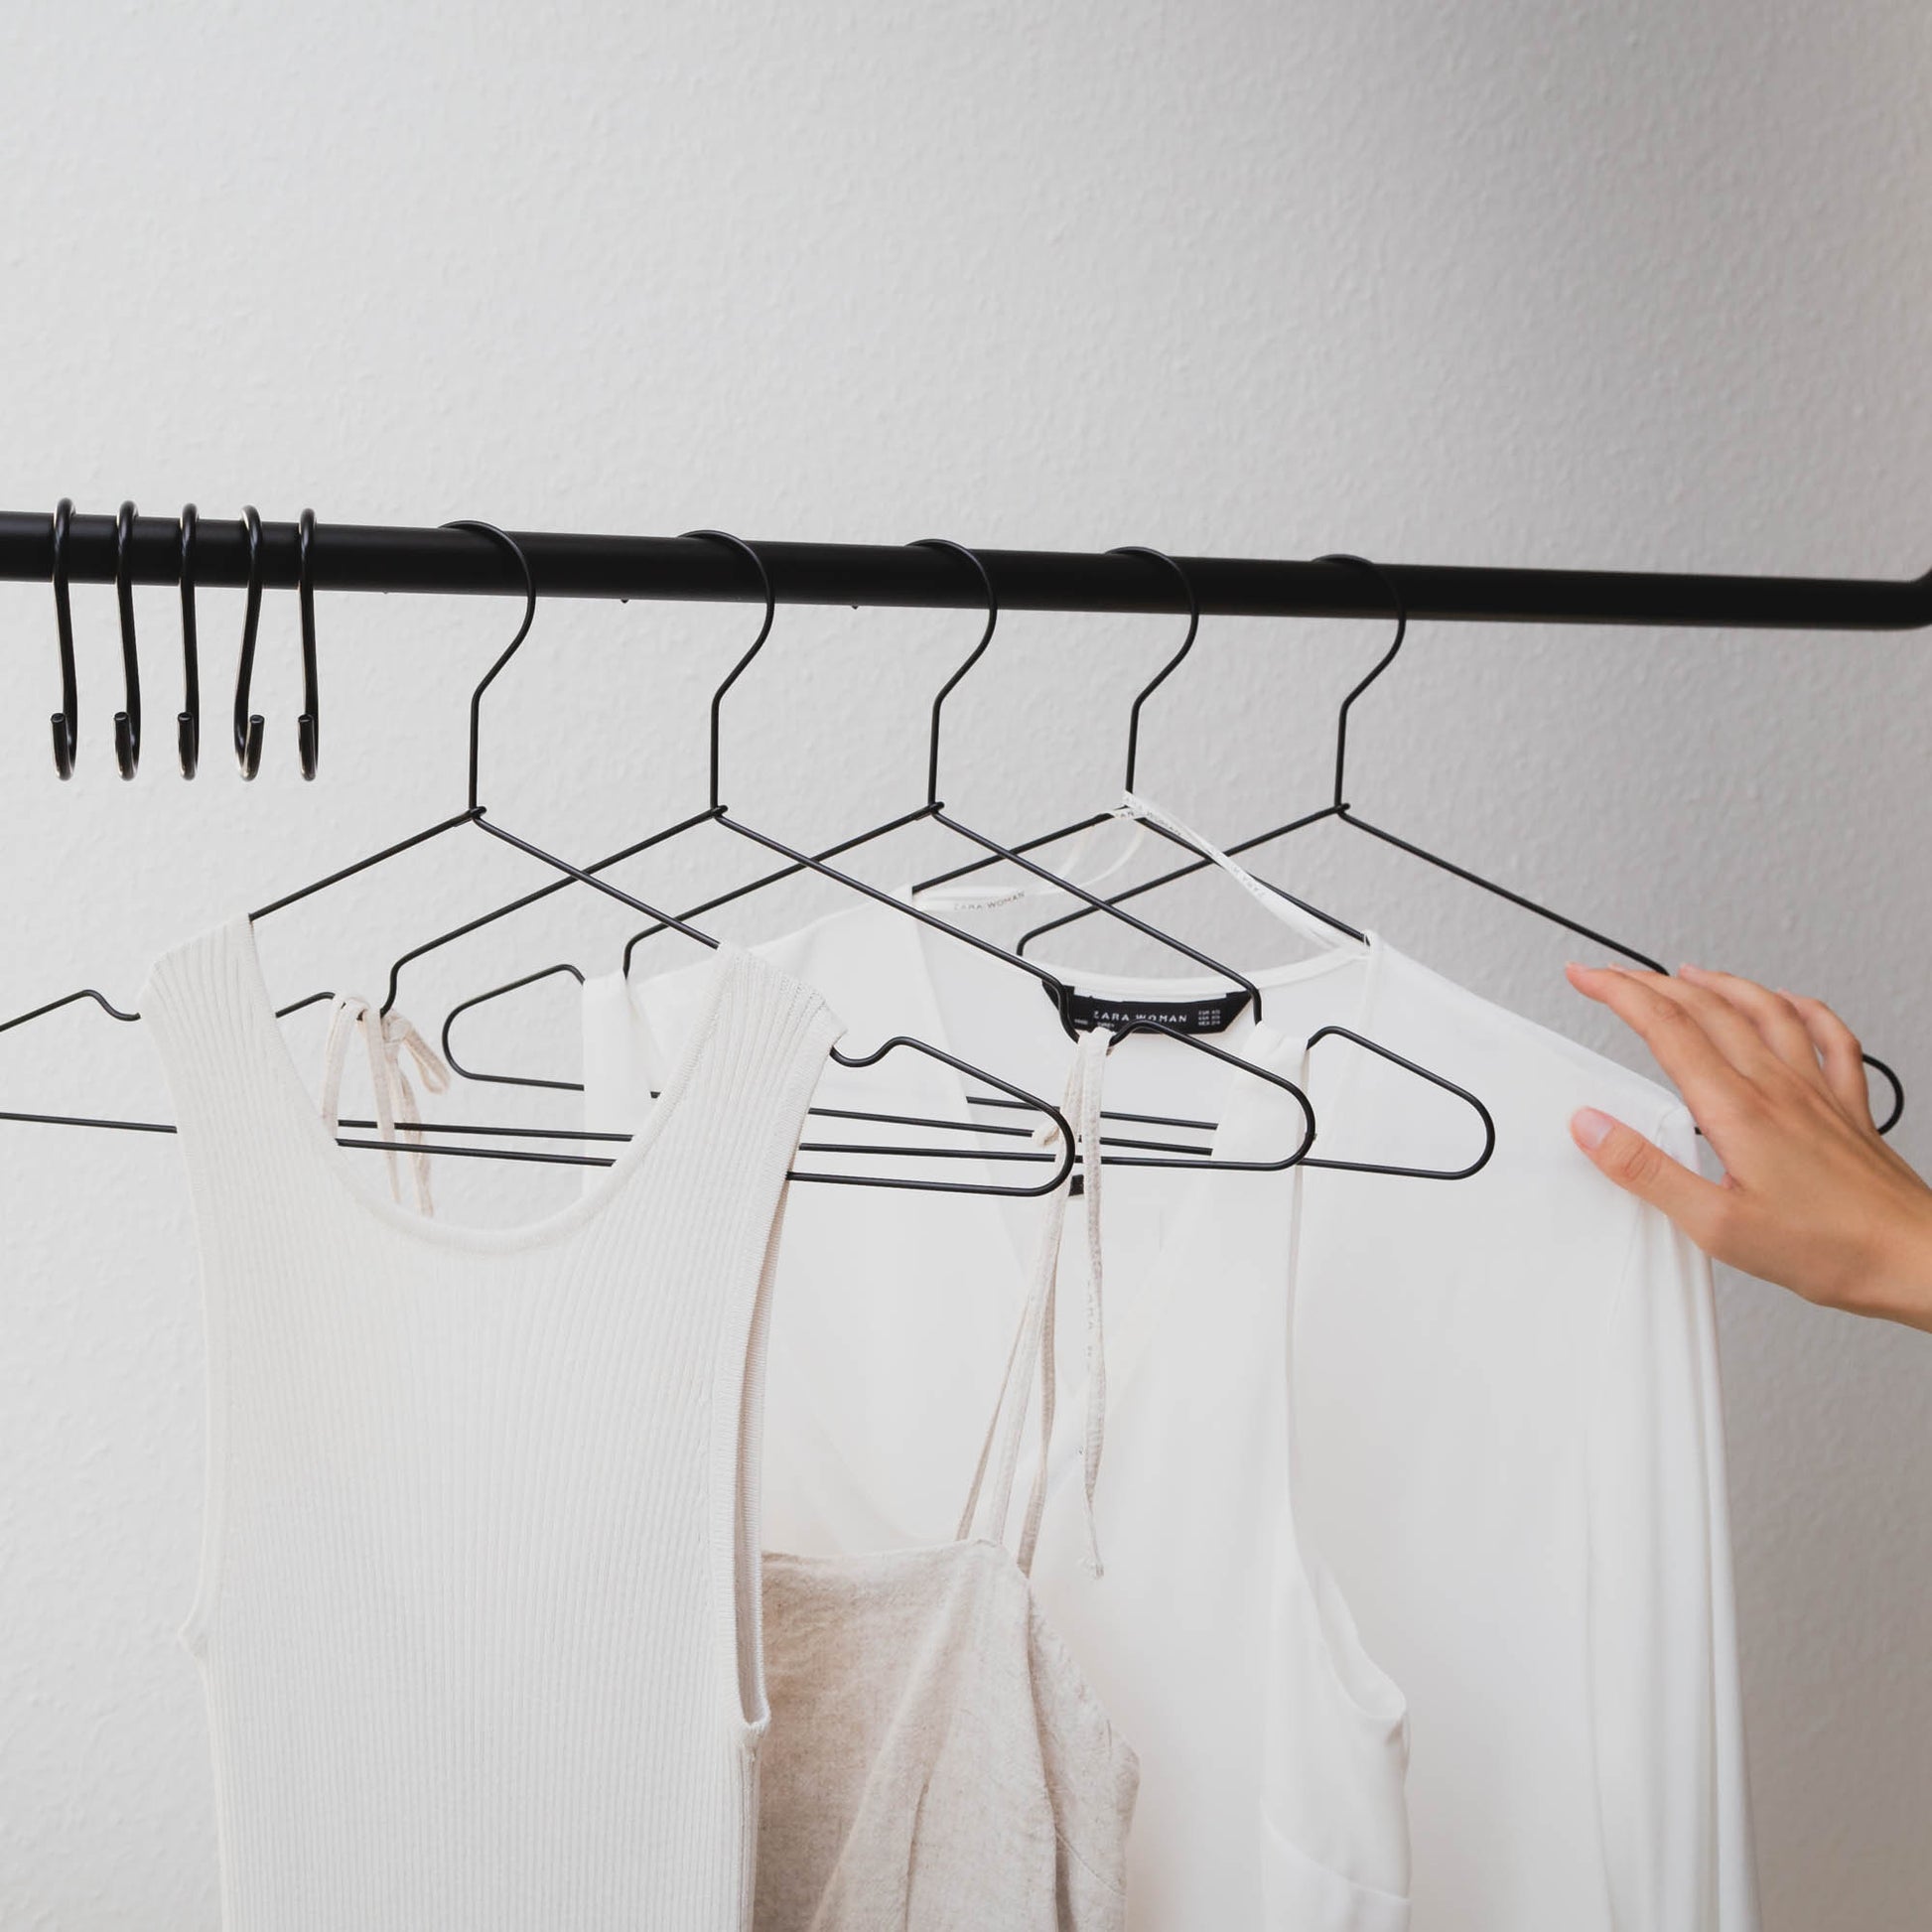 Buy clothes hangers made of sturdy metal online